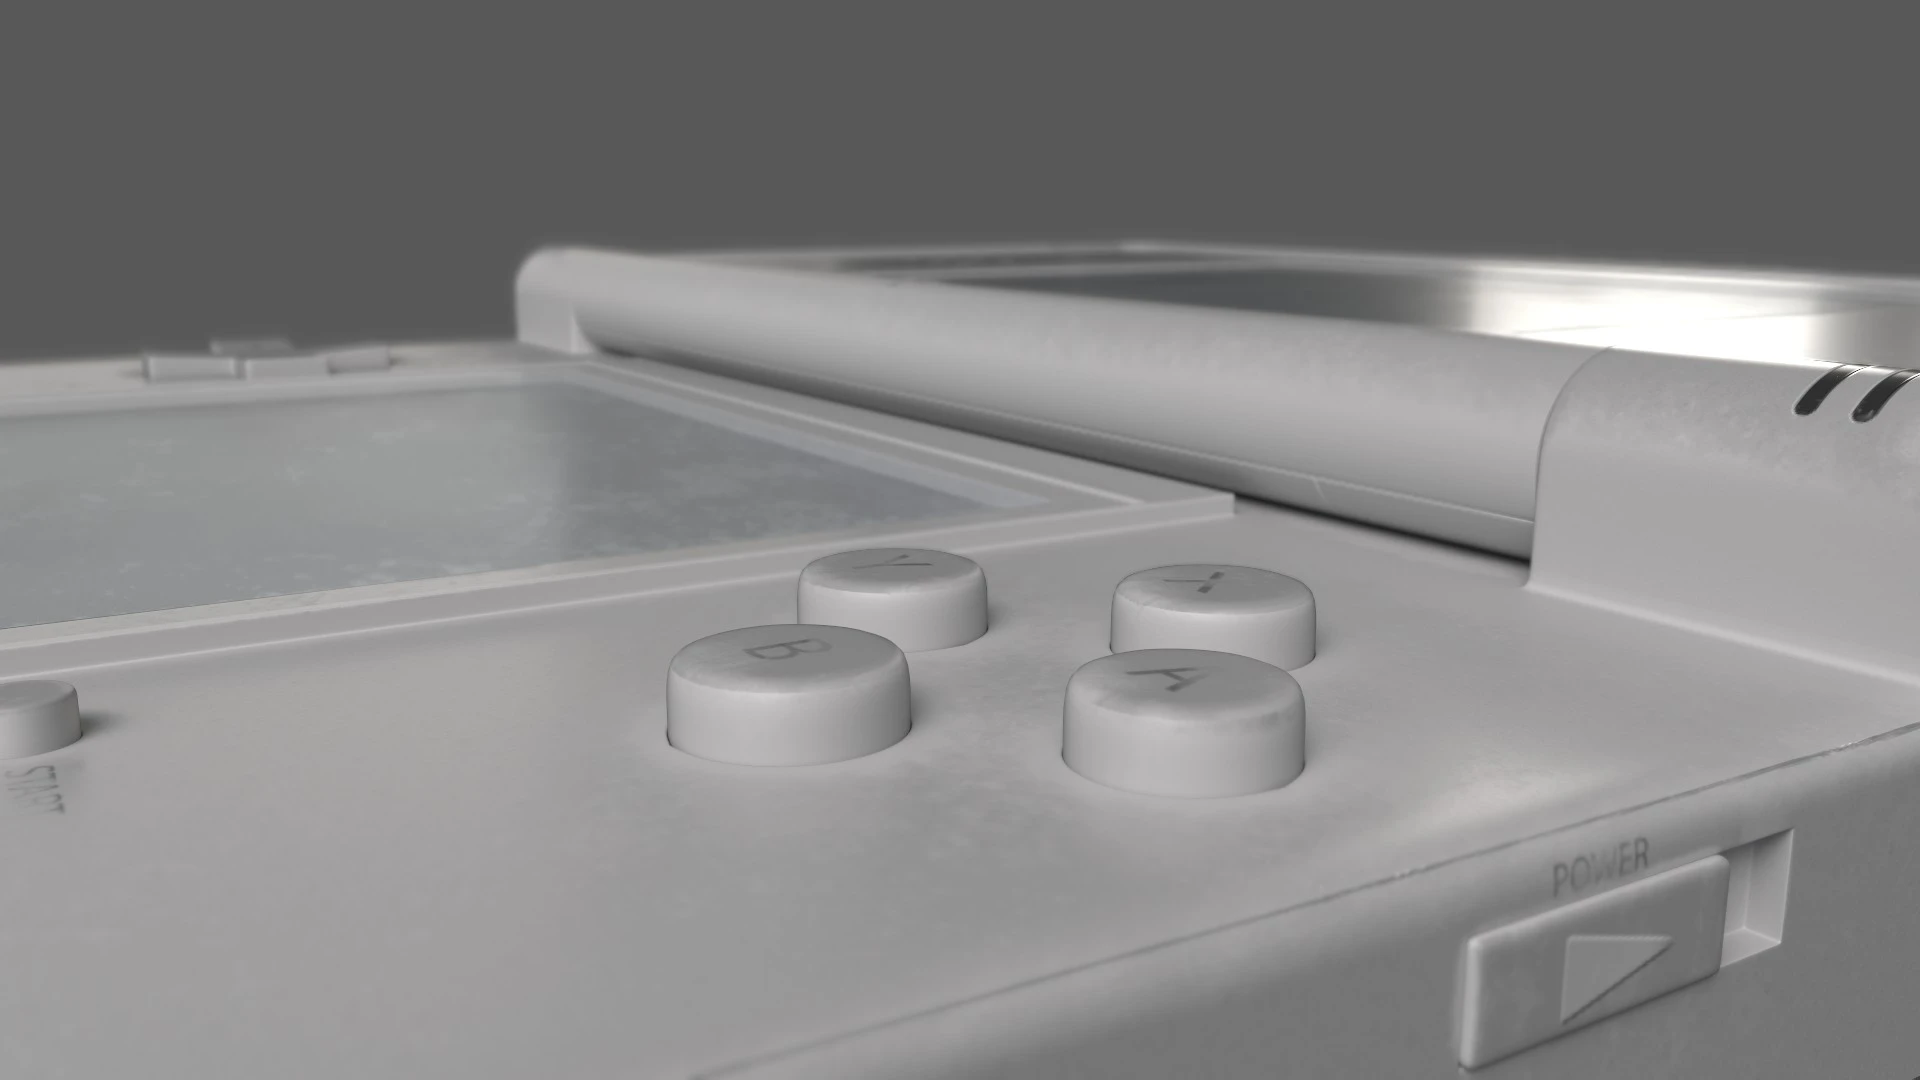 Dirty 3d render of a DS n4